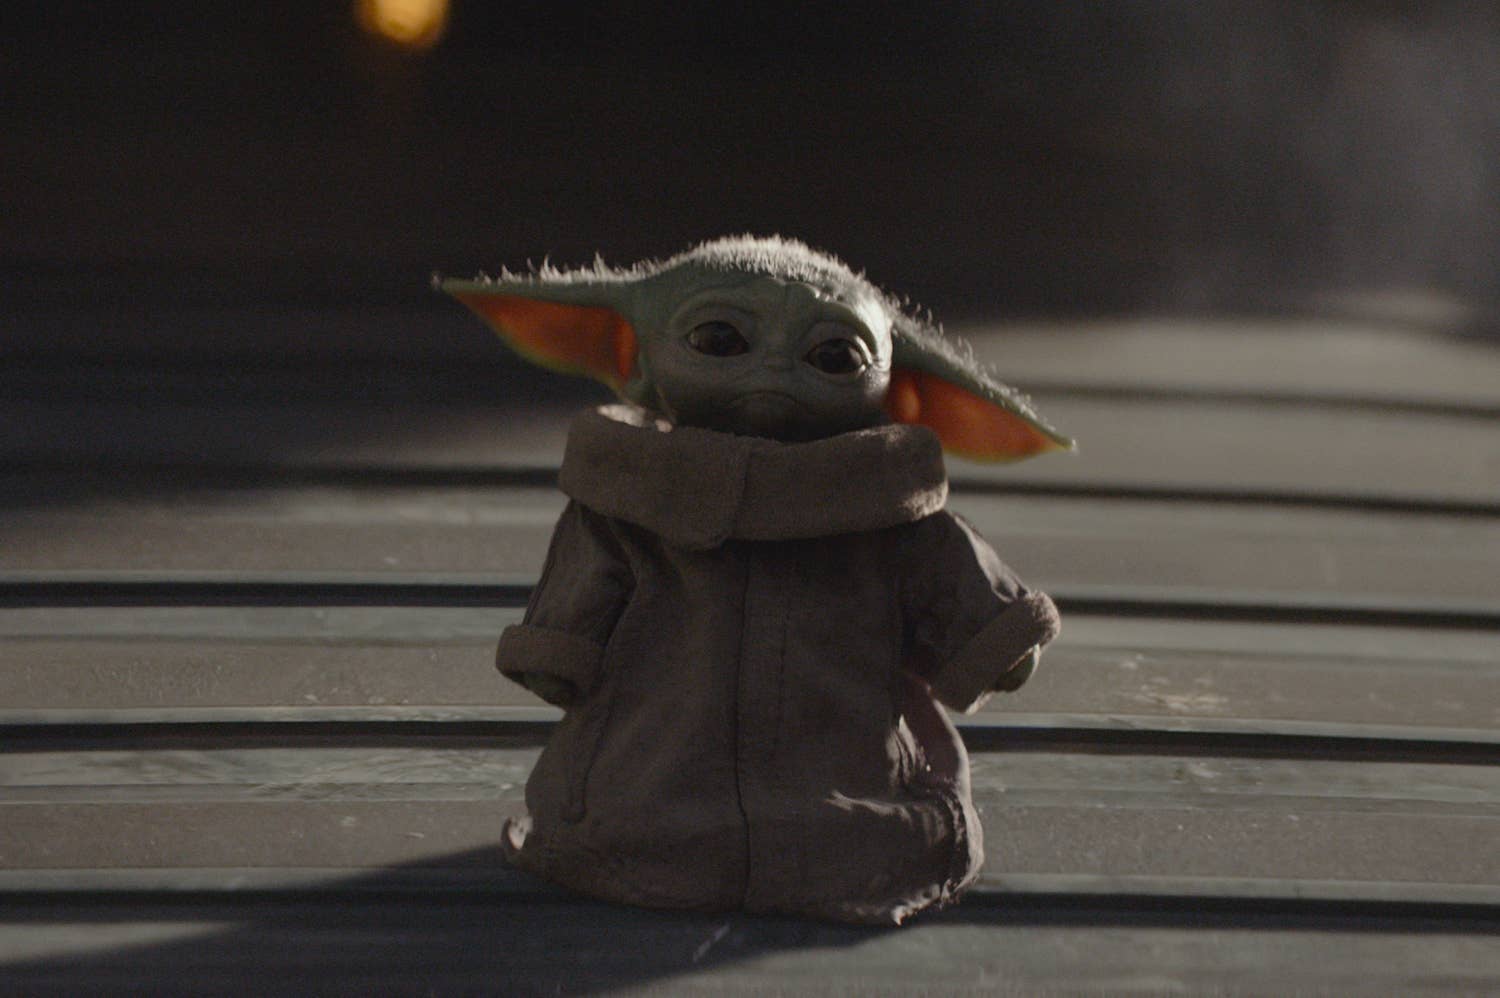 Baby Yoda, aka The Child from the Star Wars franchise's Disney+ series 'The Mandalorian'